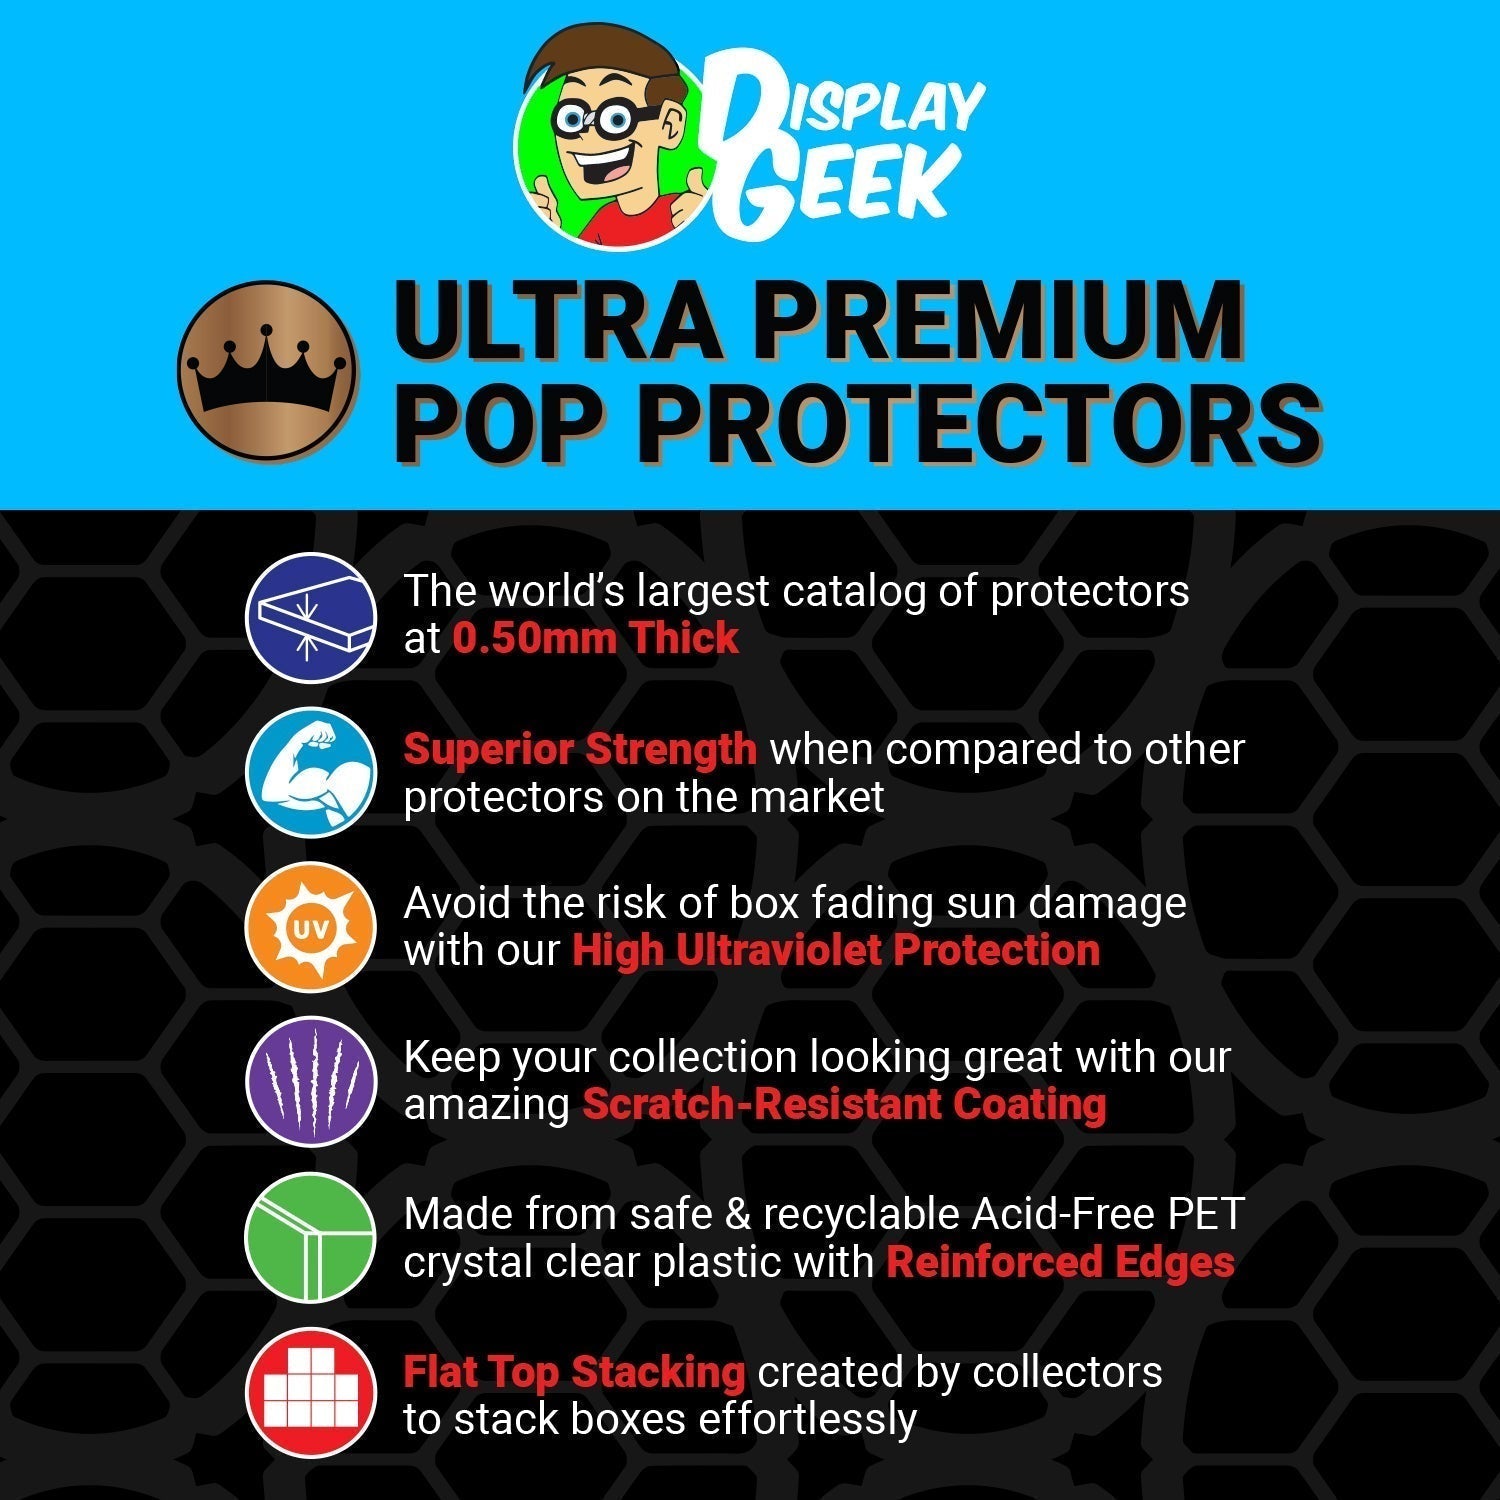 Pop Protector for Vynl 2 Pack Luke Skywalker & Princess Leia Funko - PPG Pop Protector Guide Search Created by Display Geek